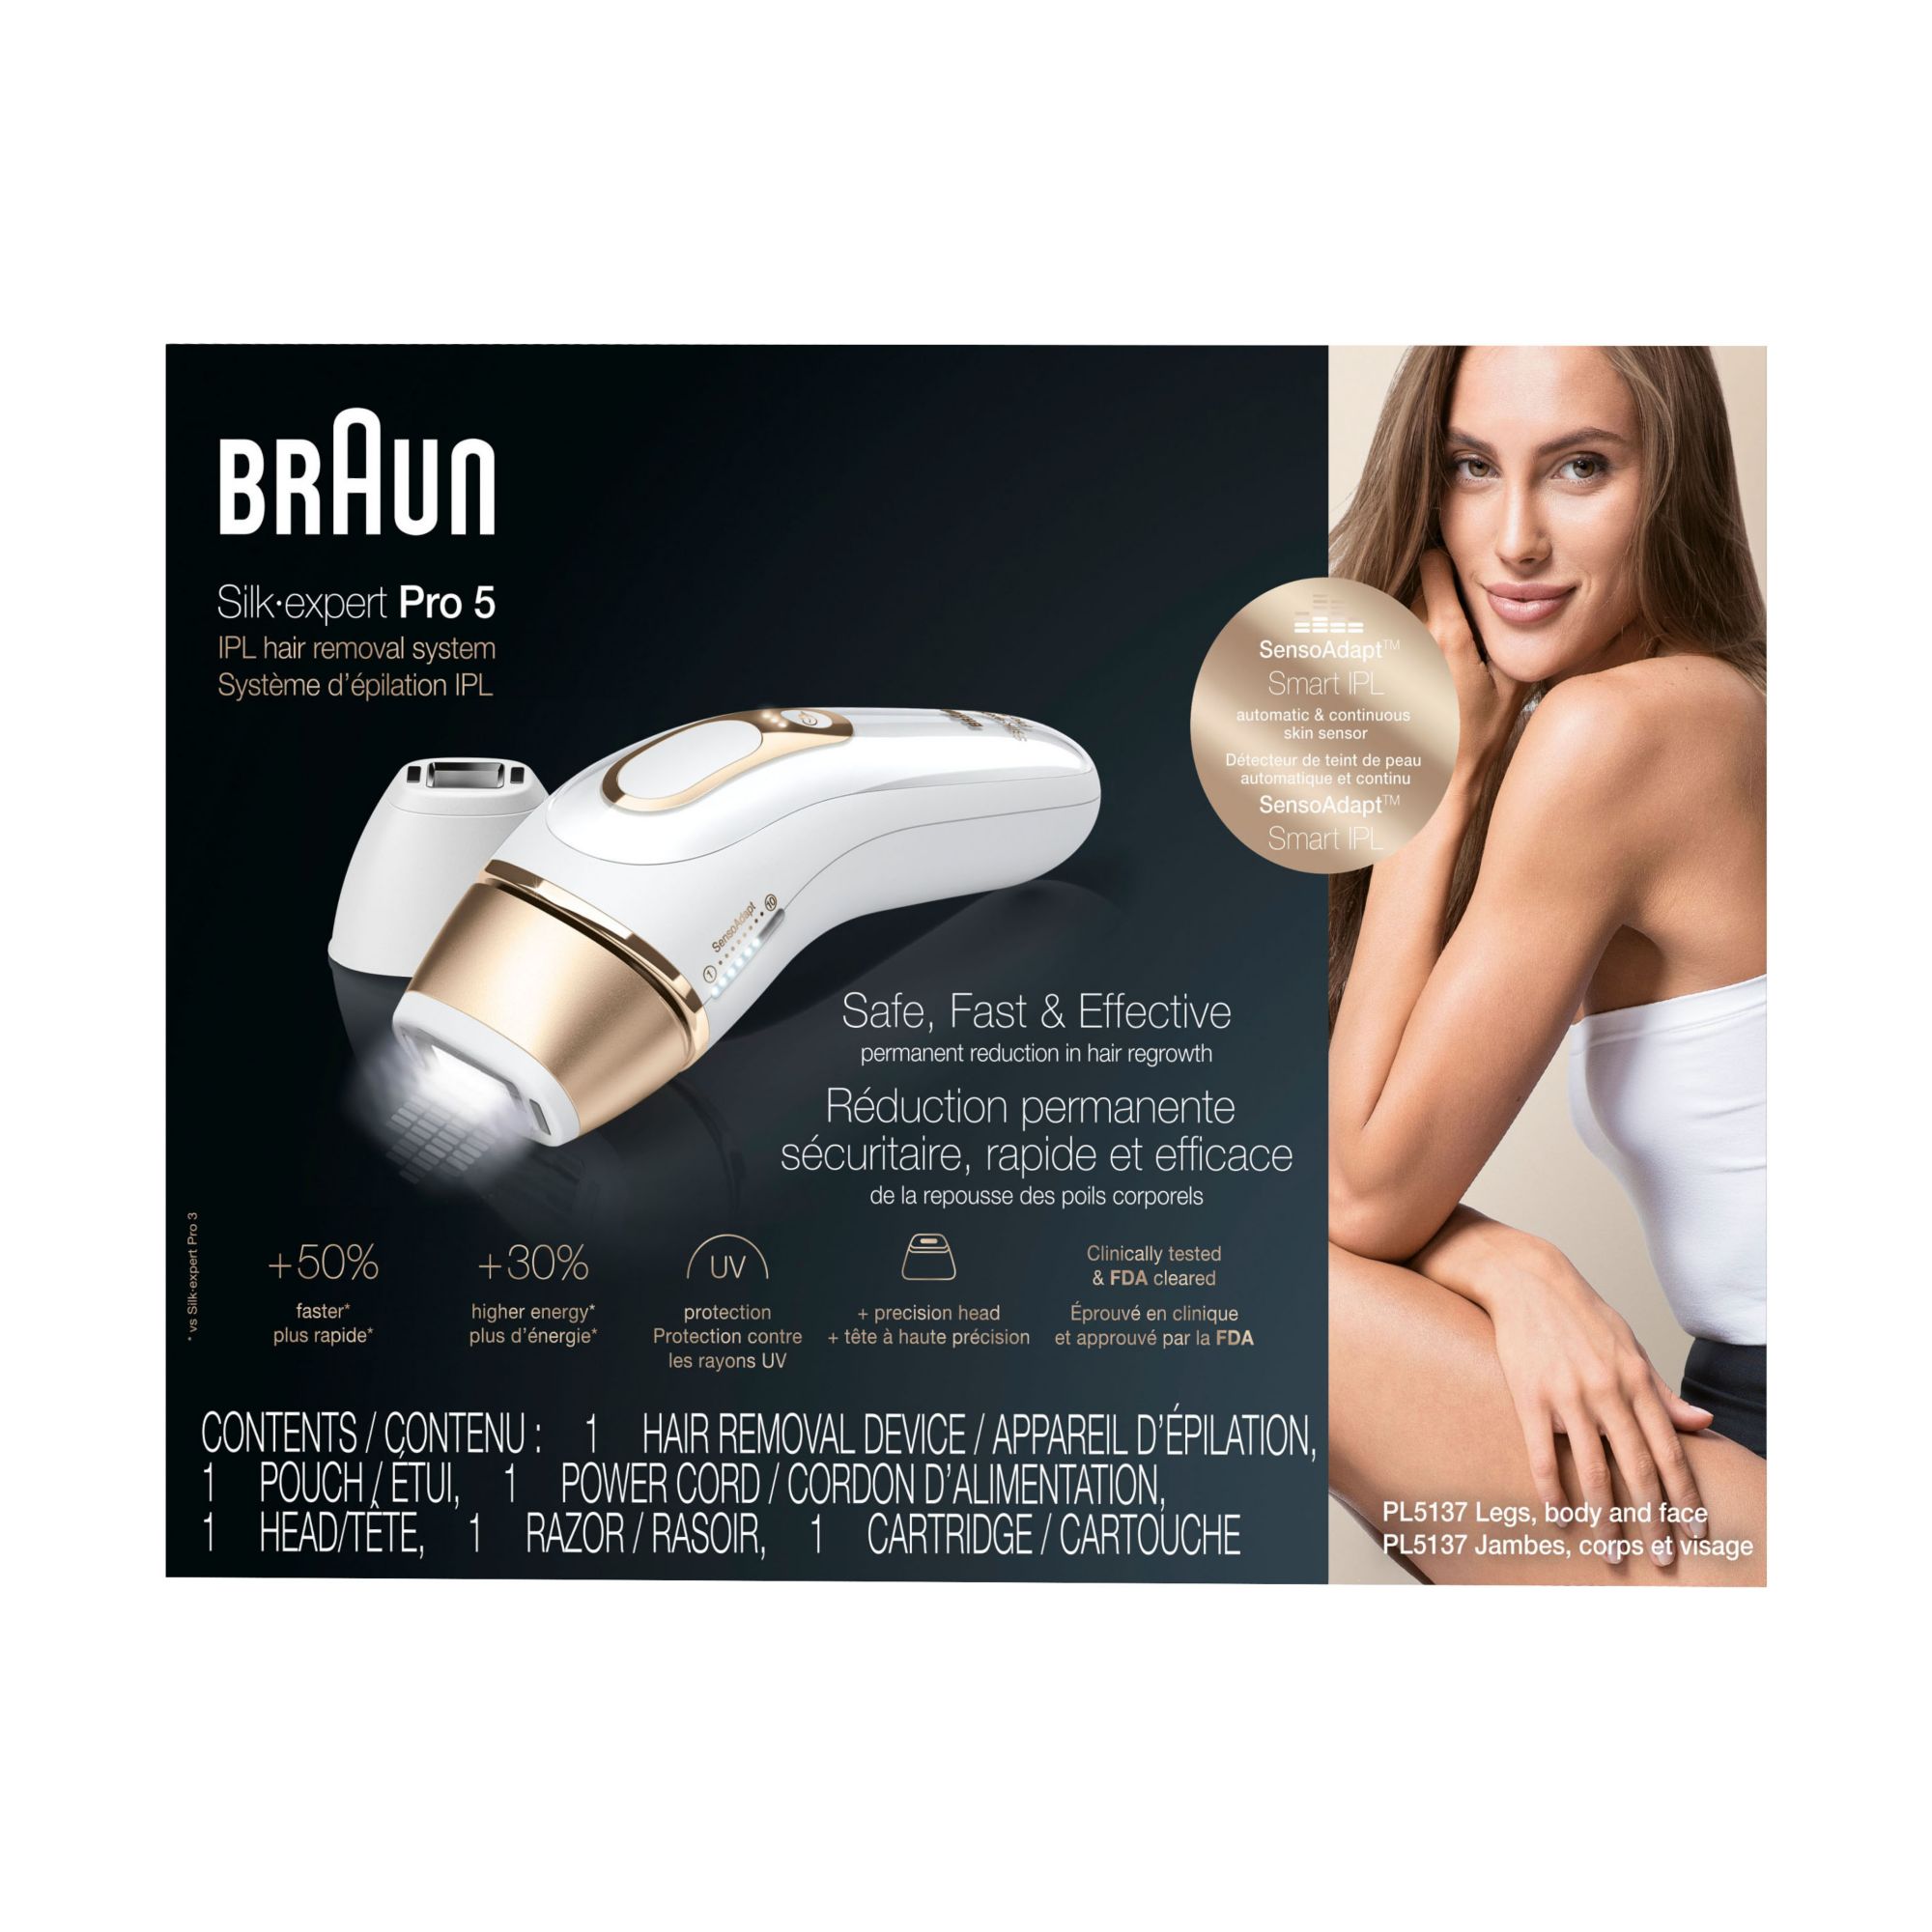 Kerry-Lou tries the Braun Silk Expert Pro 5 IPL hair remover - does it  really work? NOT SPONSORED 